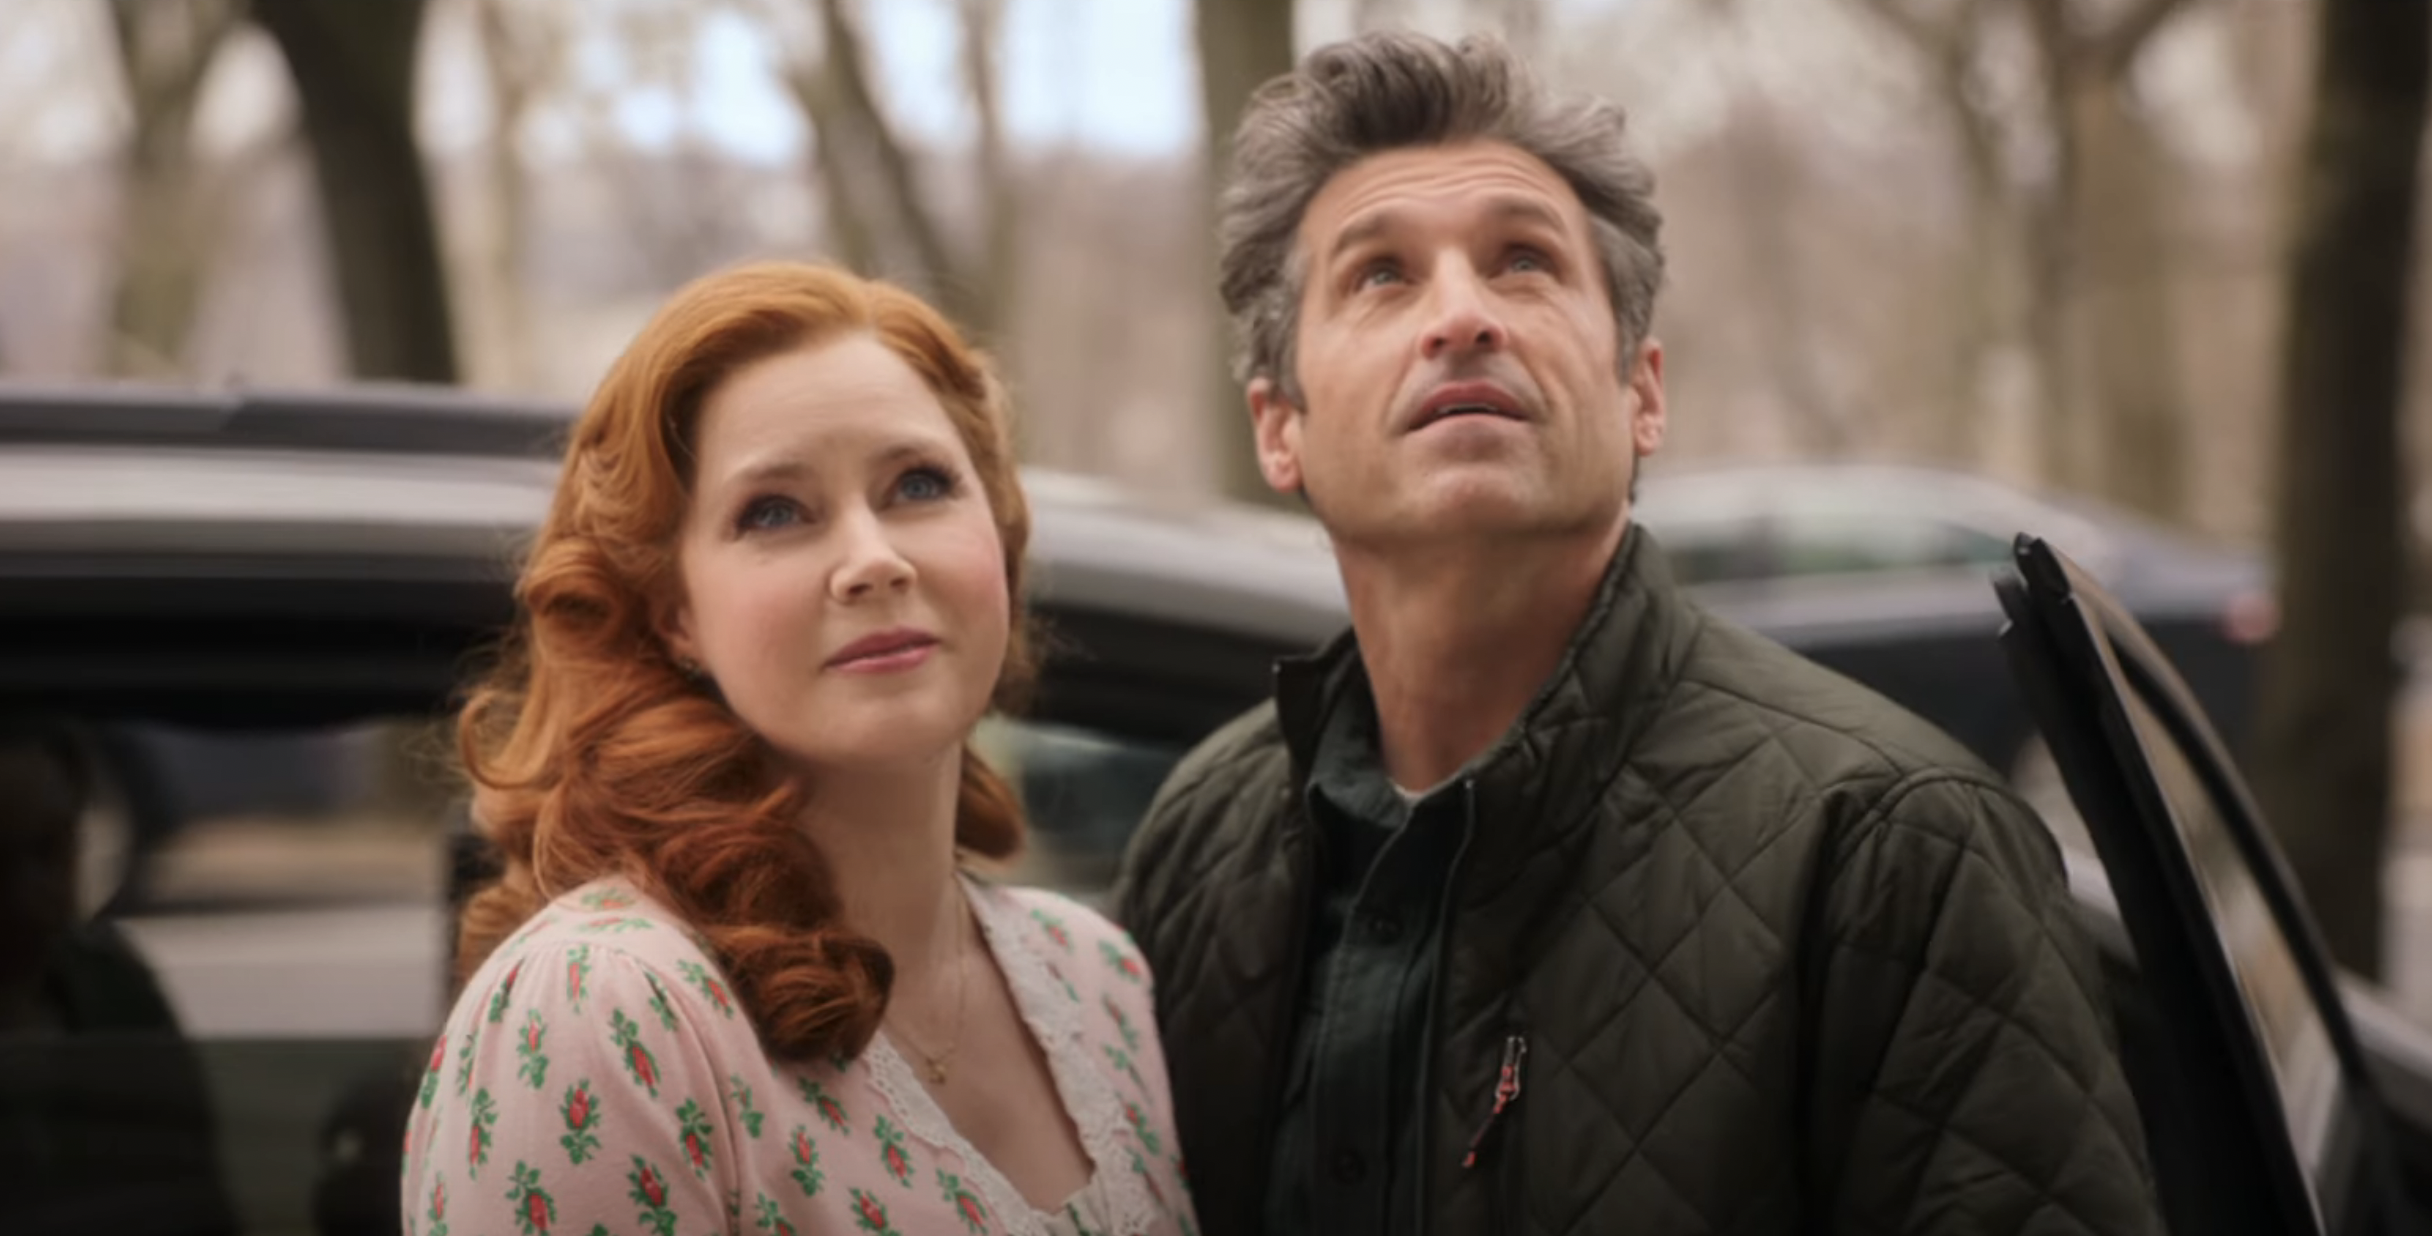 Disney Unveils A Magical New Trailer For ‘Disenchanted’